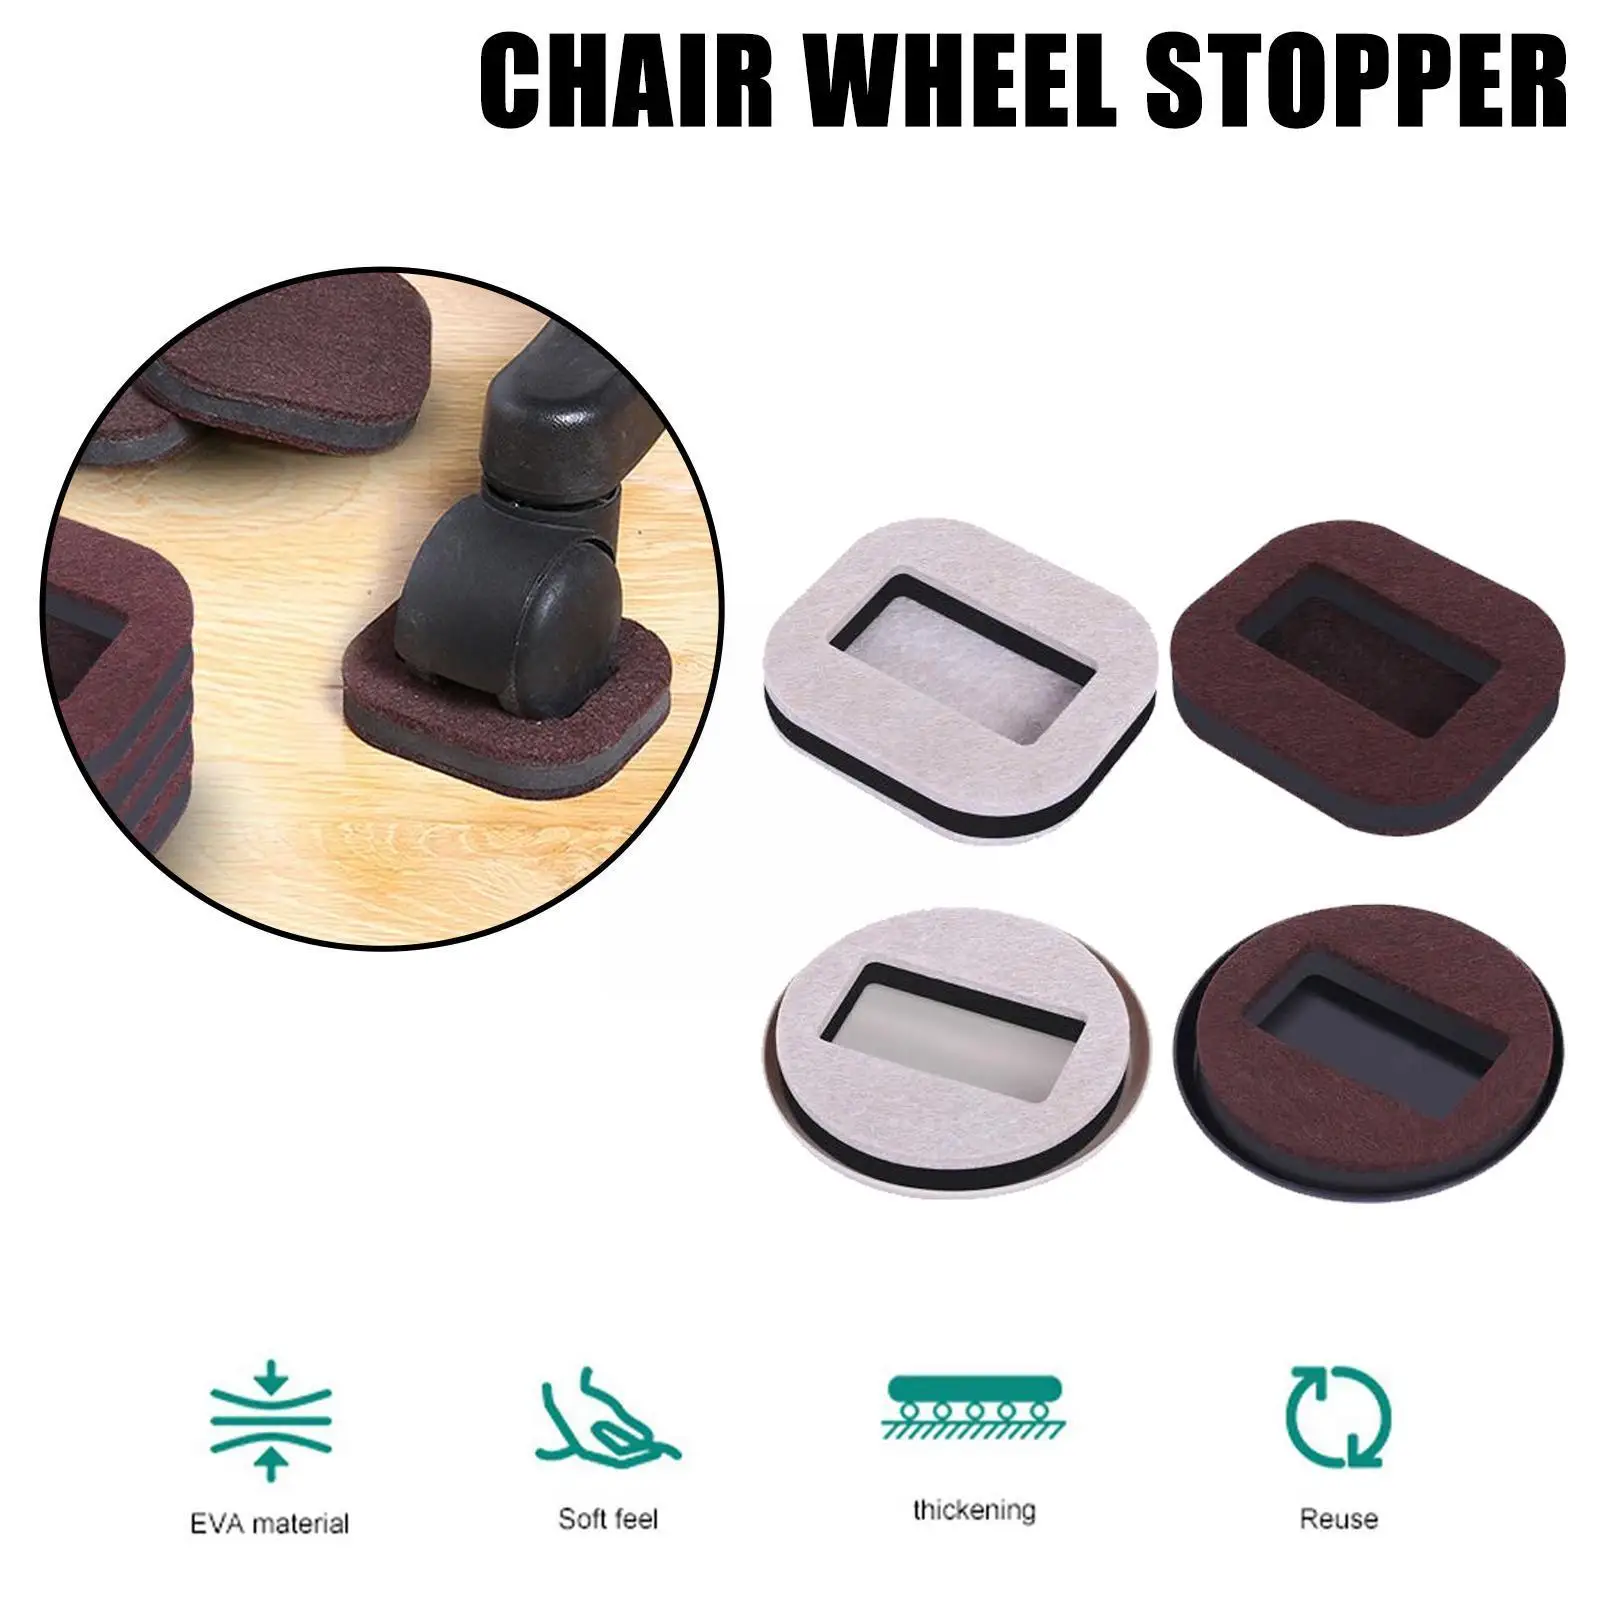 

5pcs Office Chair Wheel Stopper Chair Fixing Shockproof Furniture Prevents Wood Caster Scratches Pad Floor Carpet Stopper W N6m7